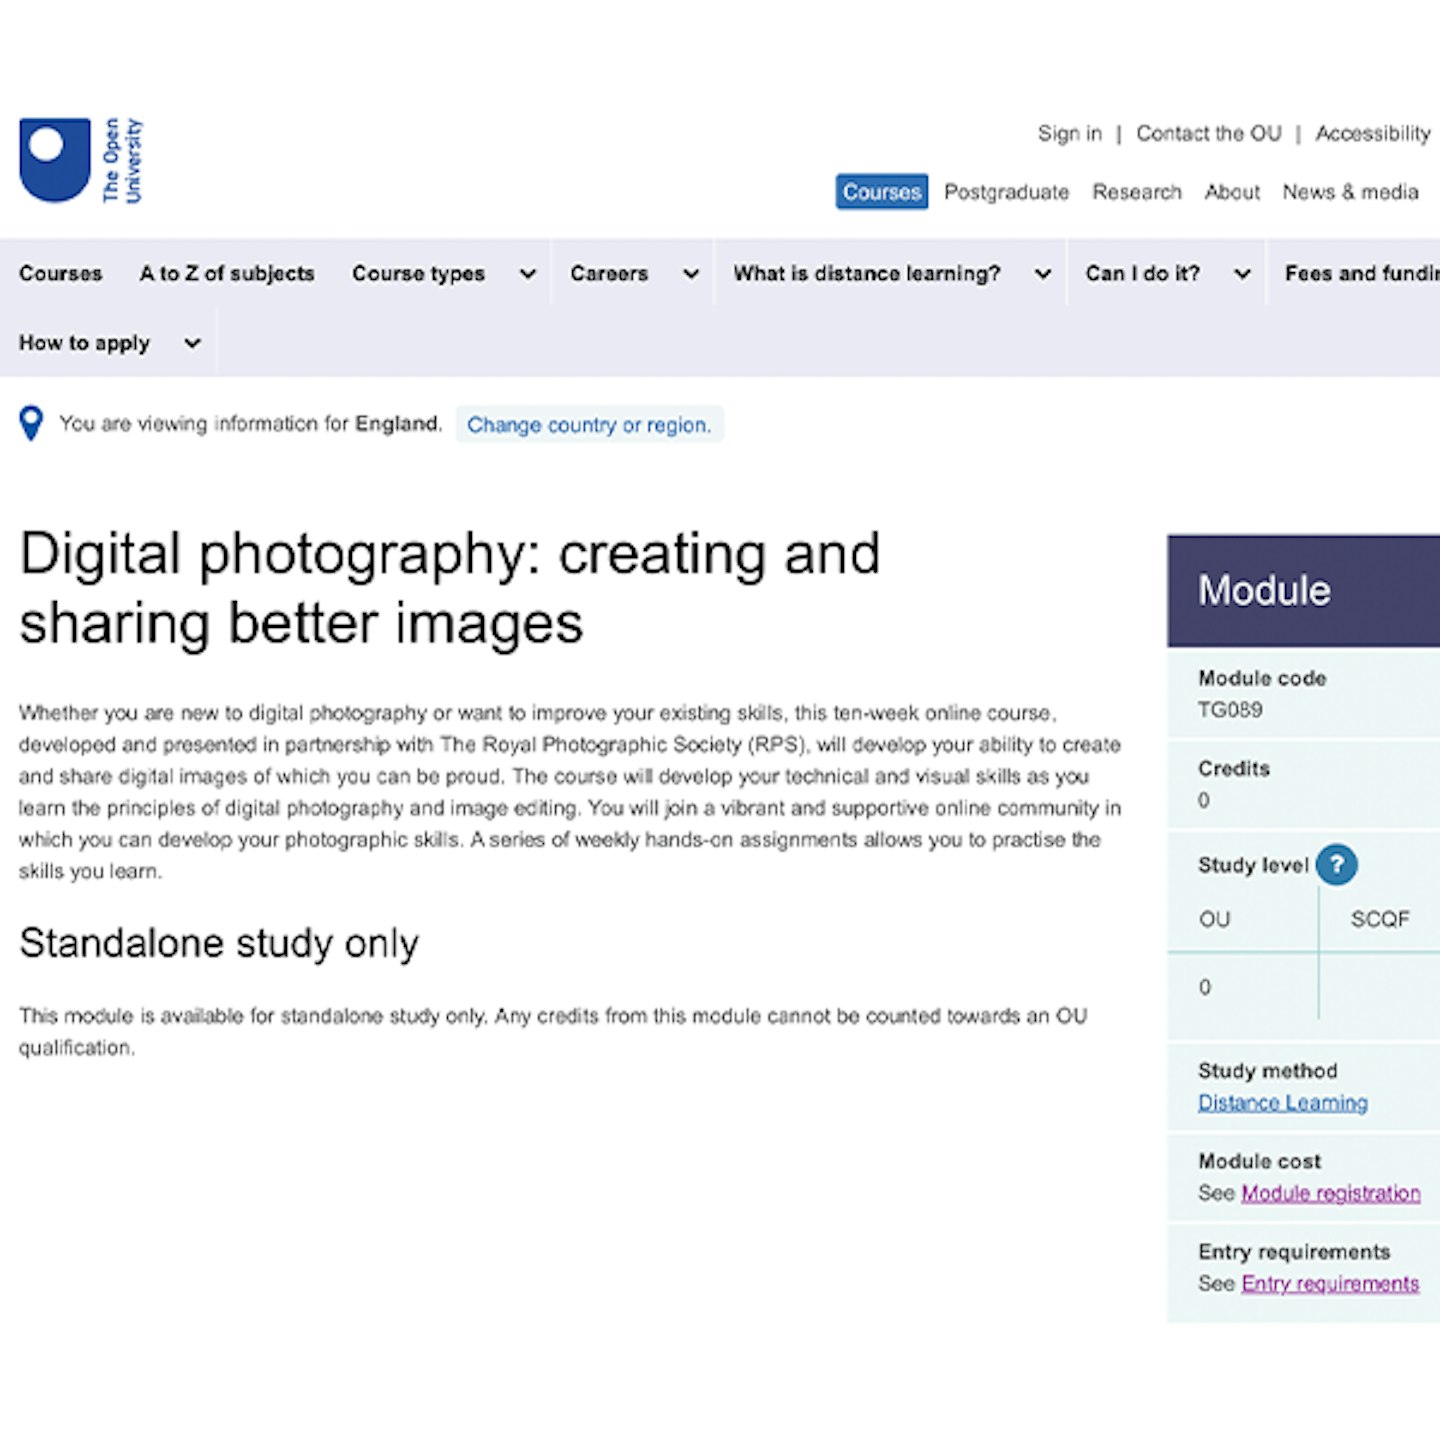 The Open University - Digital photography: creating and sharing better images